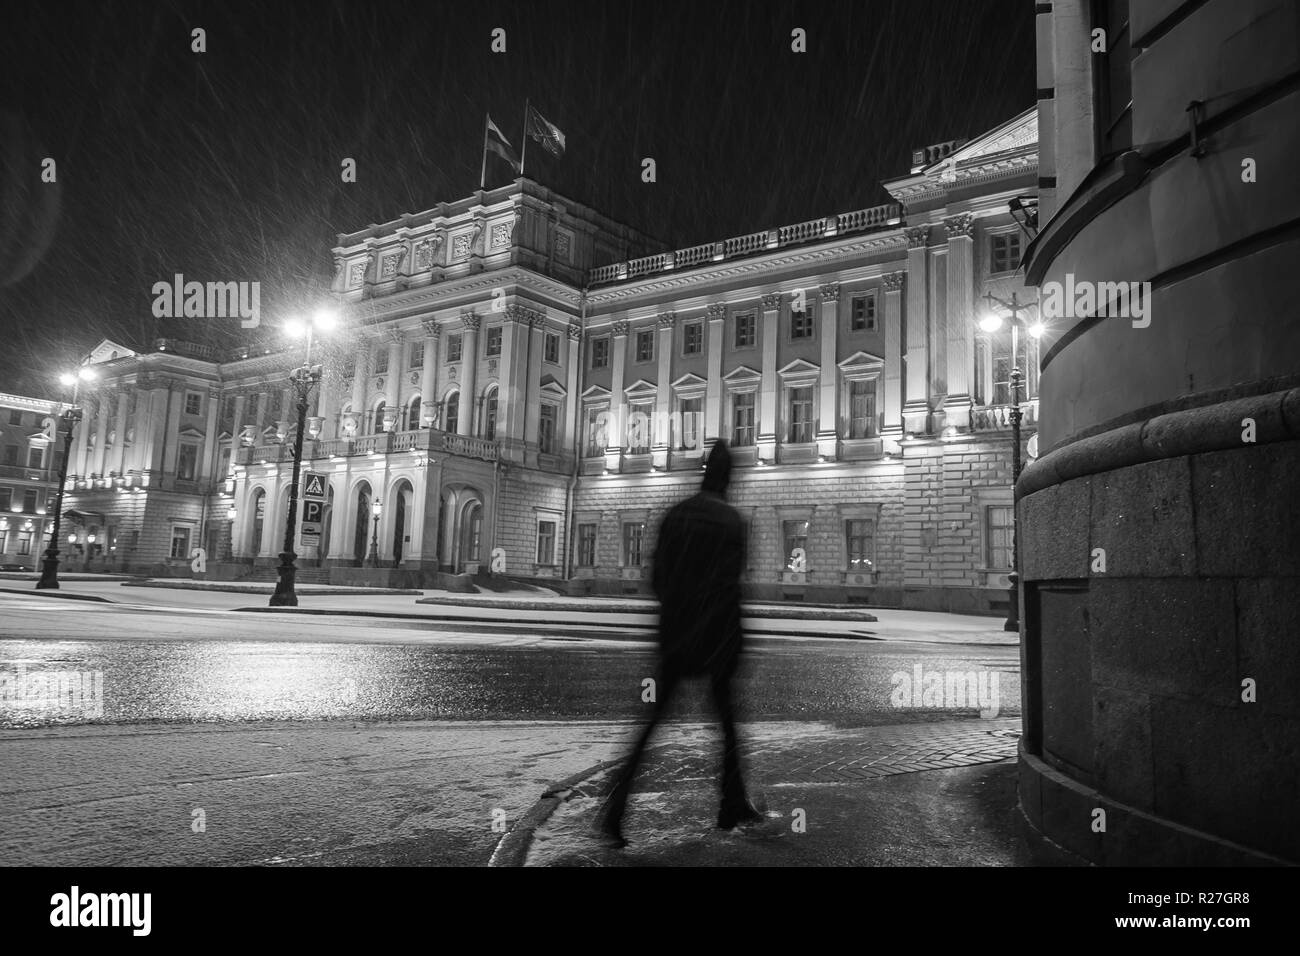 October 28, 2018 - St.Petersburg, Russia. A Legislative Assembly building (Mariinsky palace), black and white night view in winter Stock Photo